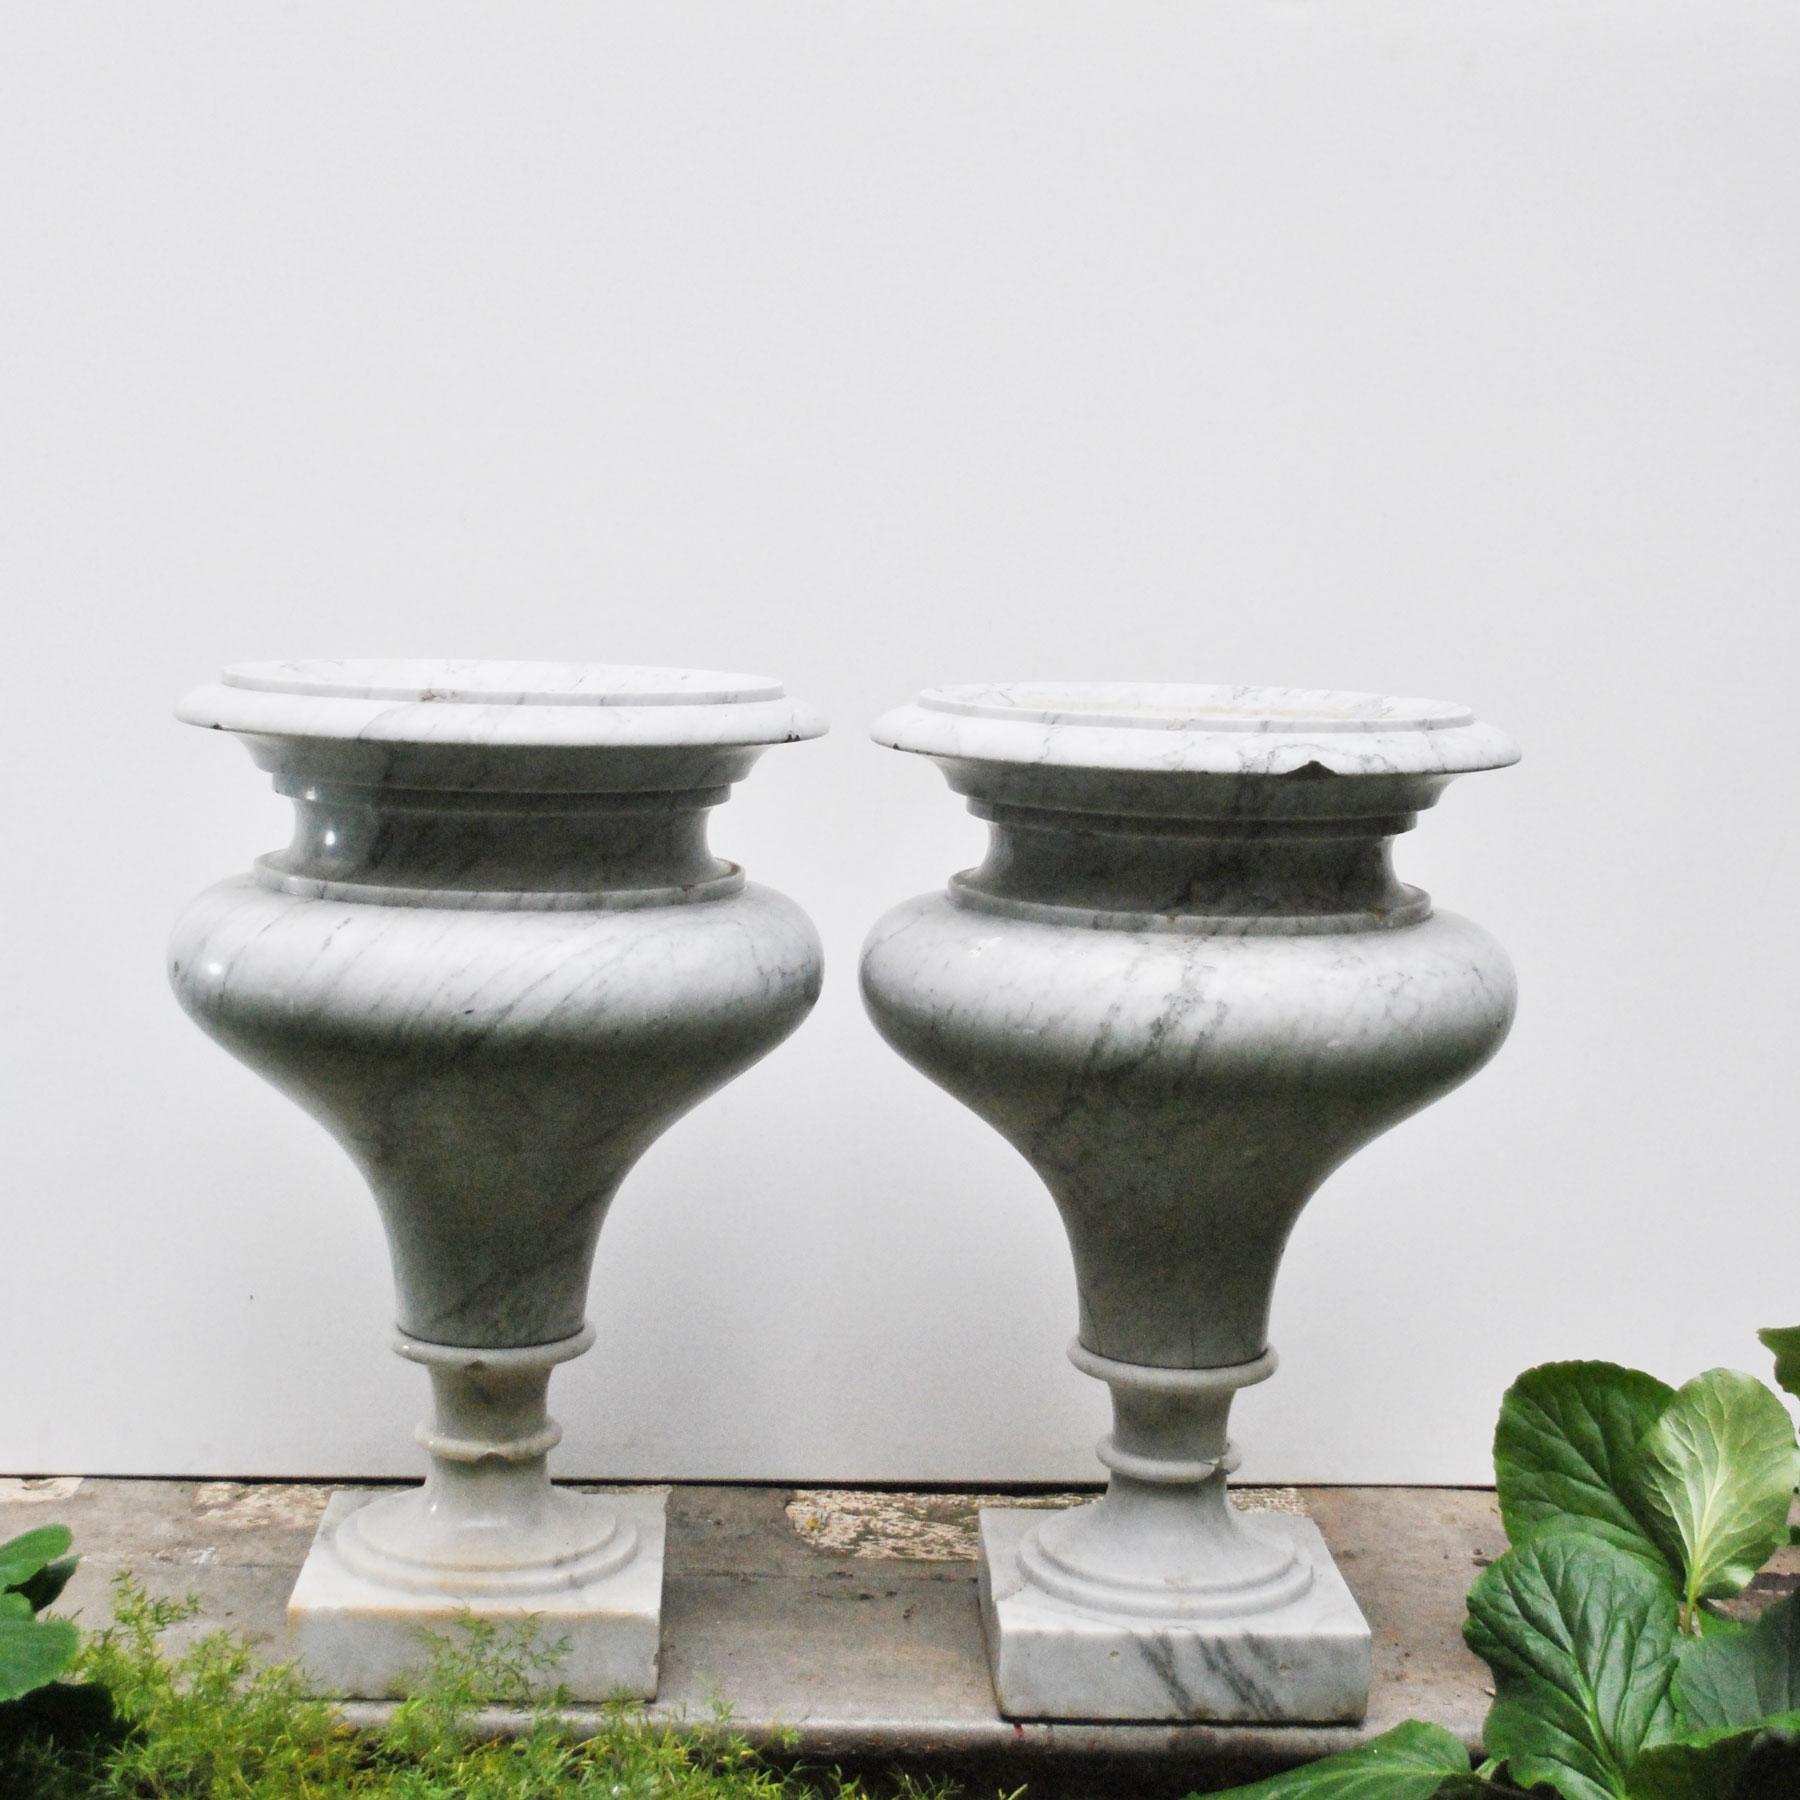 Italian Elegant Pair of Large Carrara Marble Vases, Period Early 20th Century For Sale